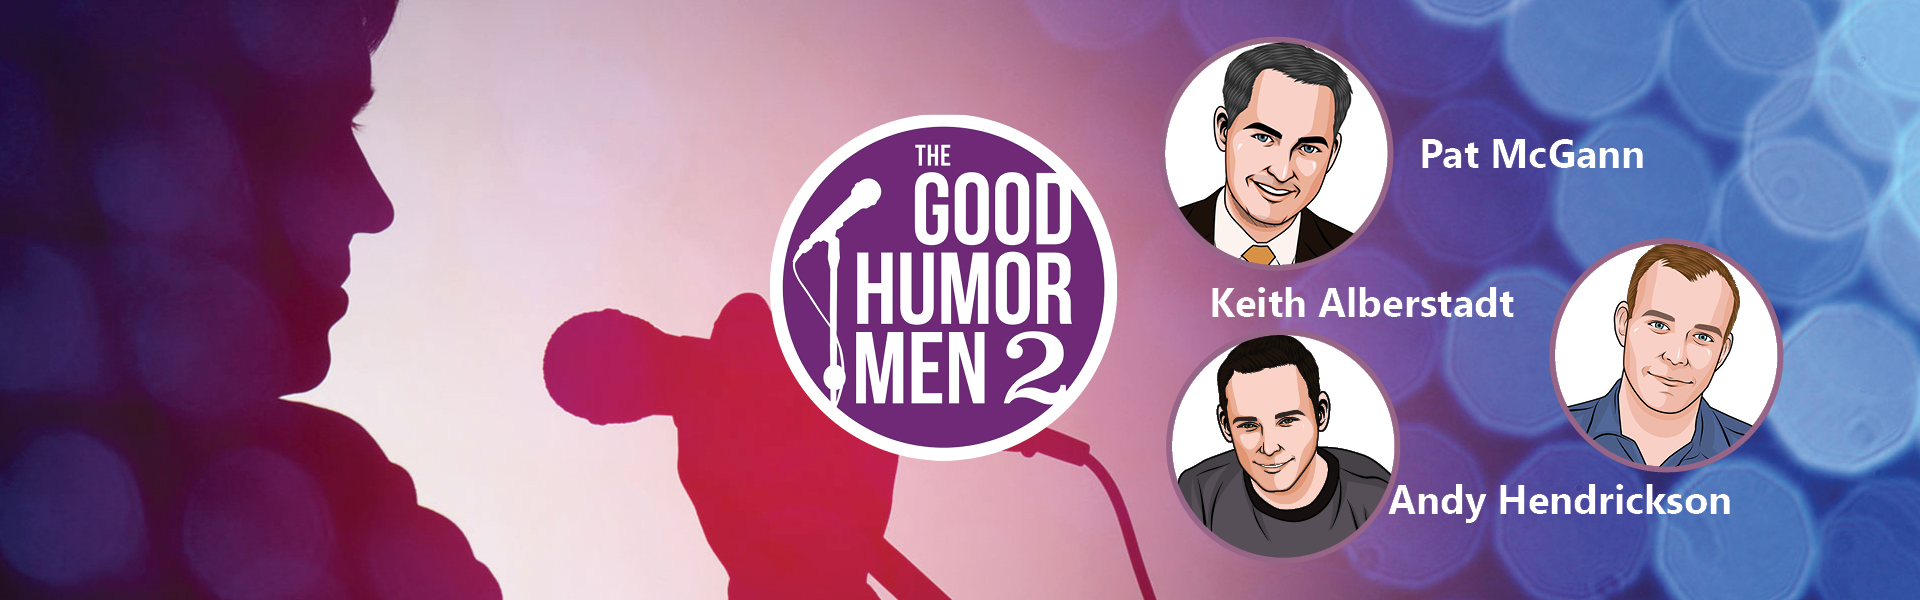 Graphic for the comedy group Good Humor Men